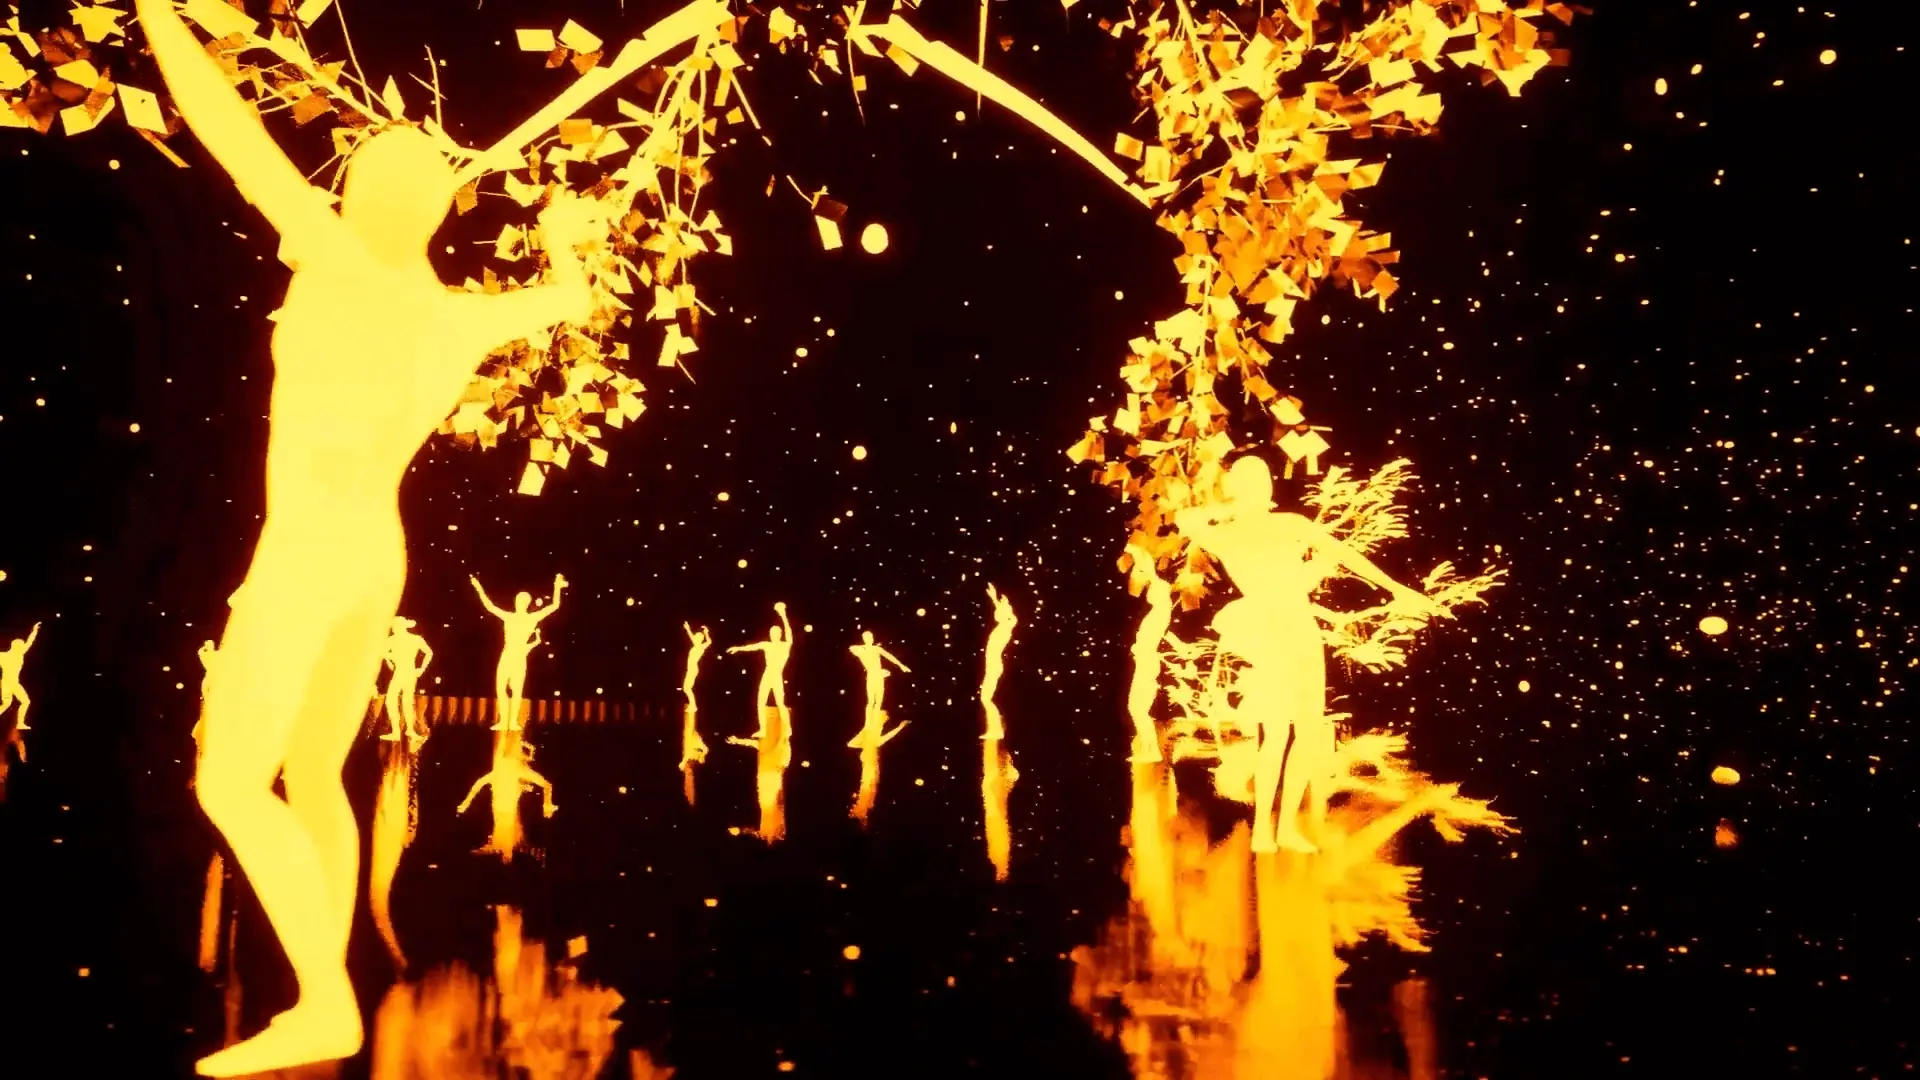 Screenshot from the VR animated film 'The Descent'. Screenshot depicts glowing figures standing in a dark reflective room, dotted with hundreds glowing lights.